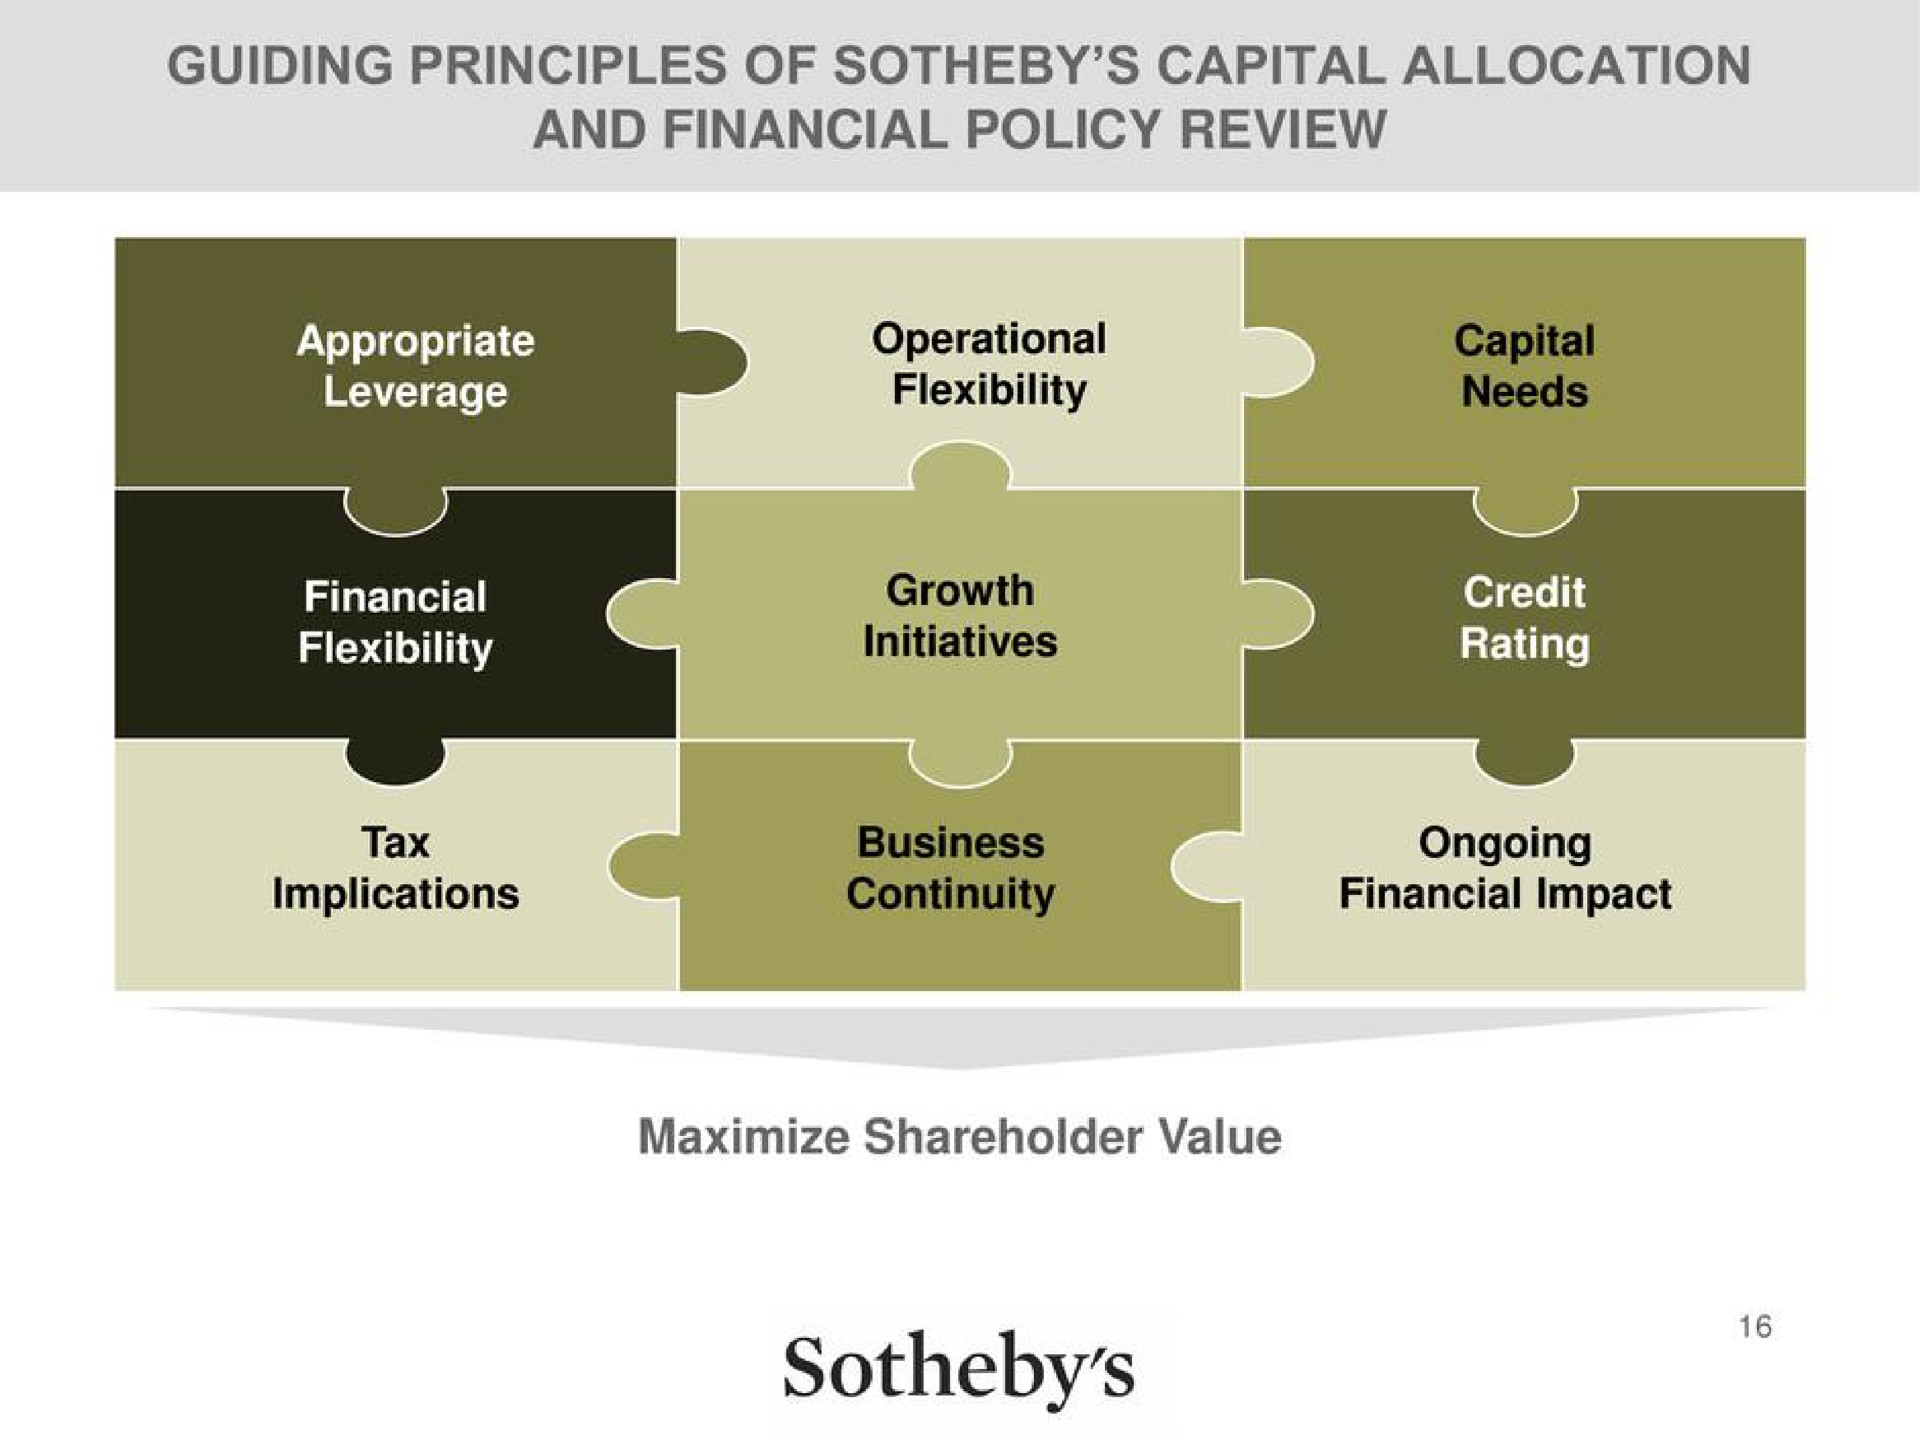 guiding principles of capital allocation and financial policy review to flexibility financial flexibility so growth initiatives fen rating | Sotheby's